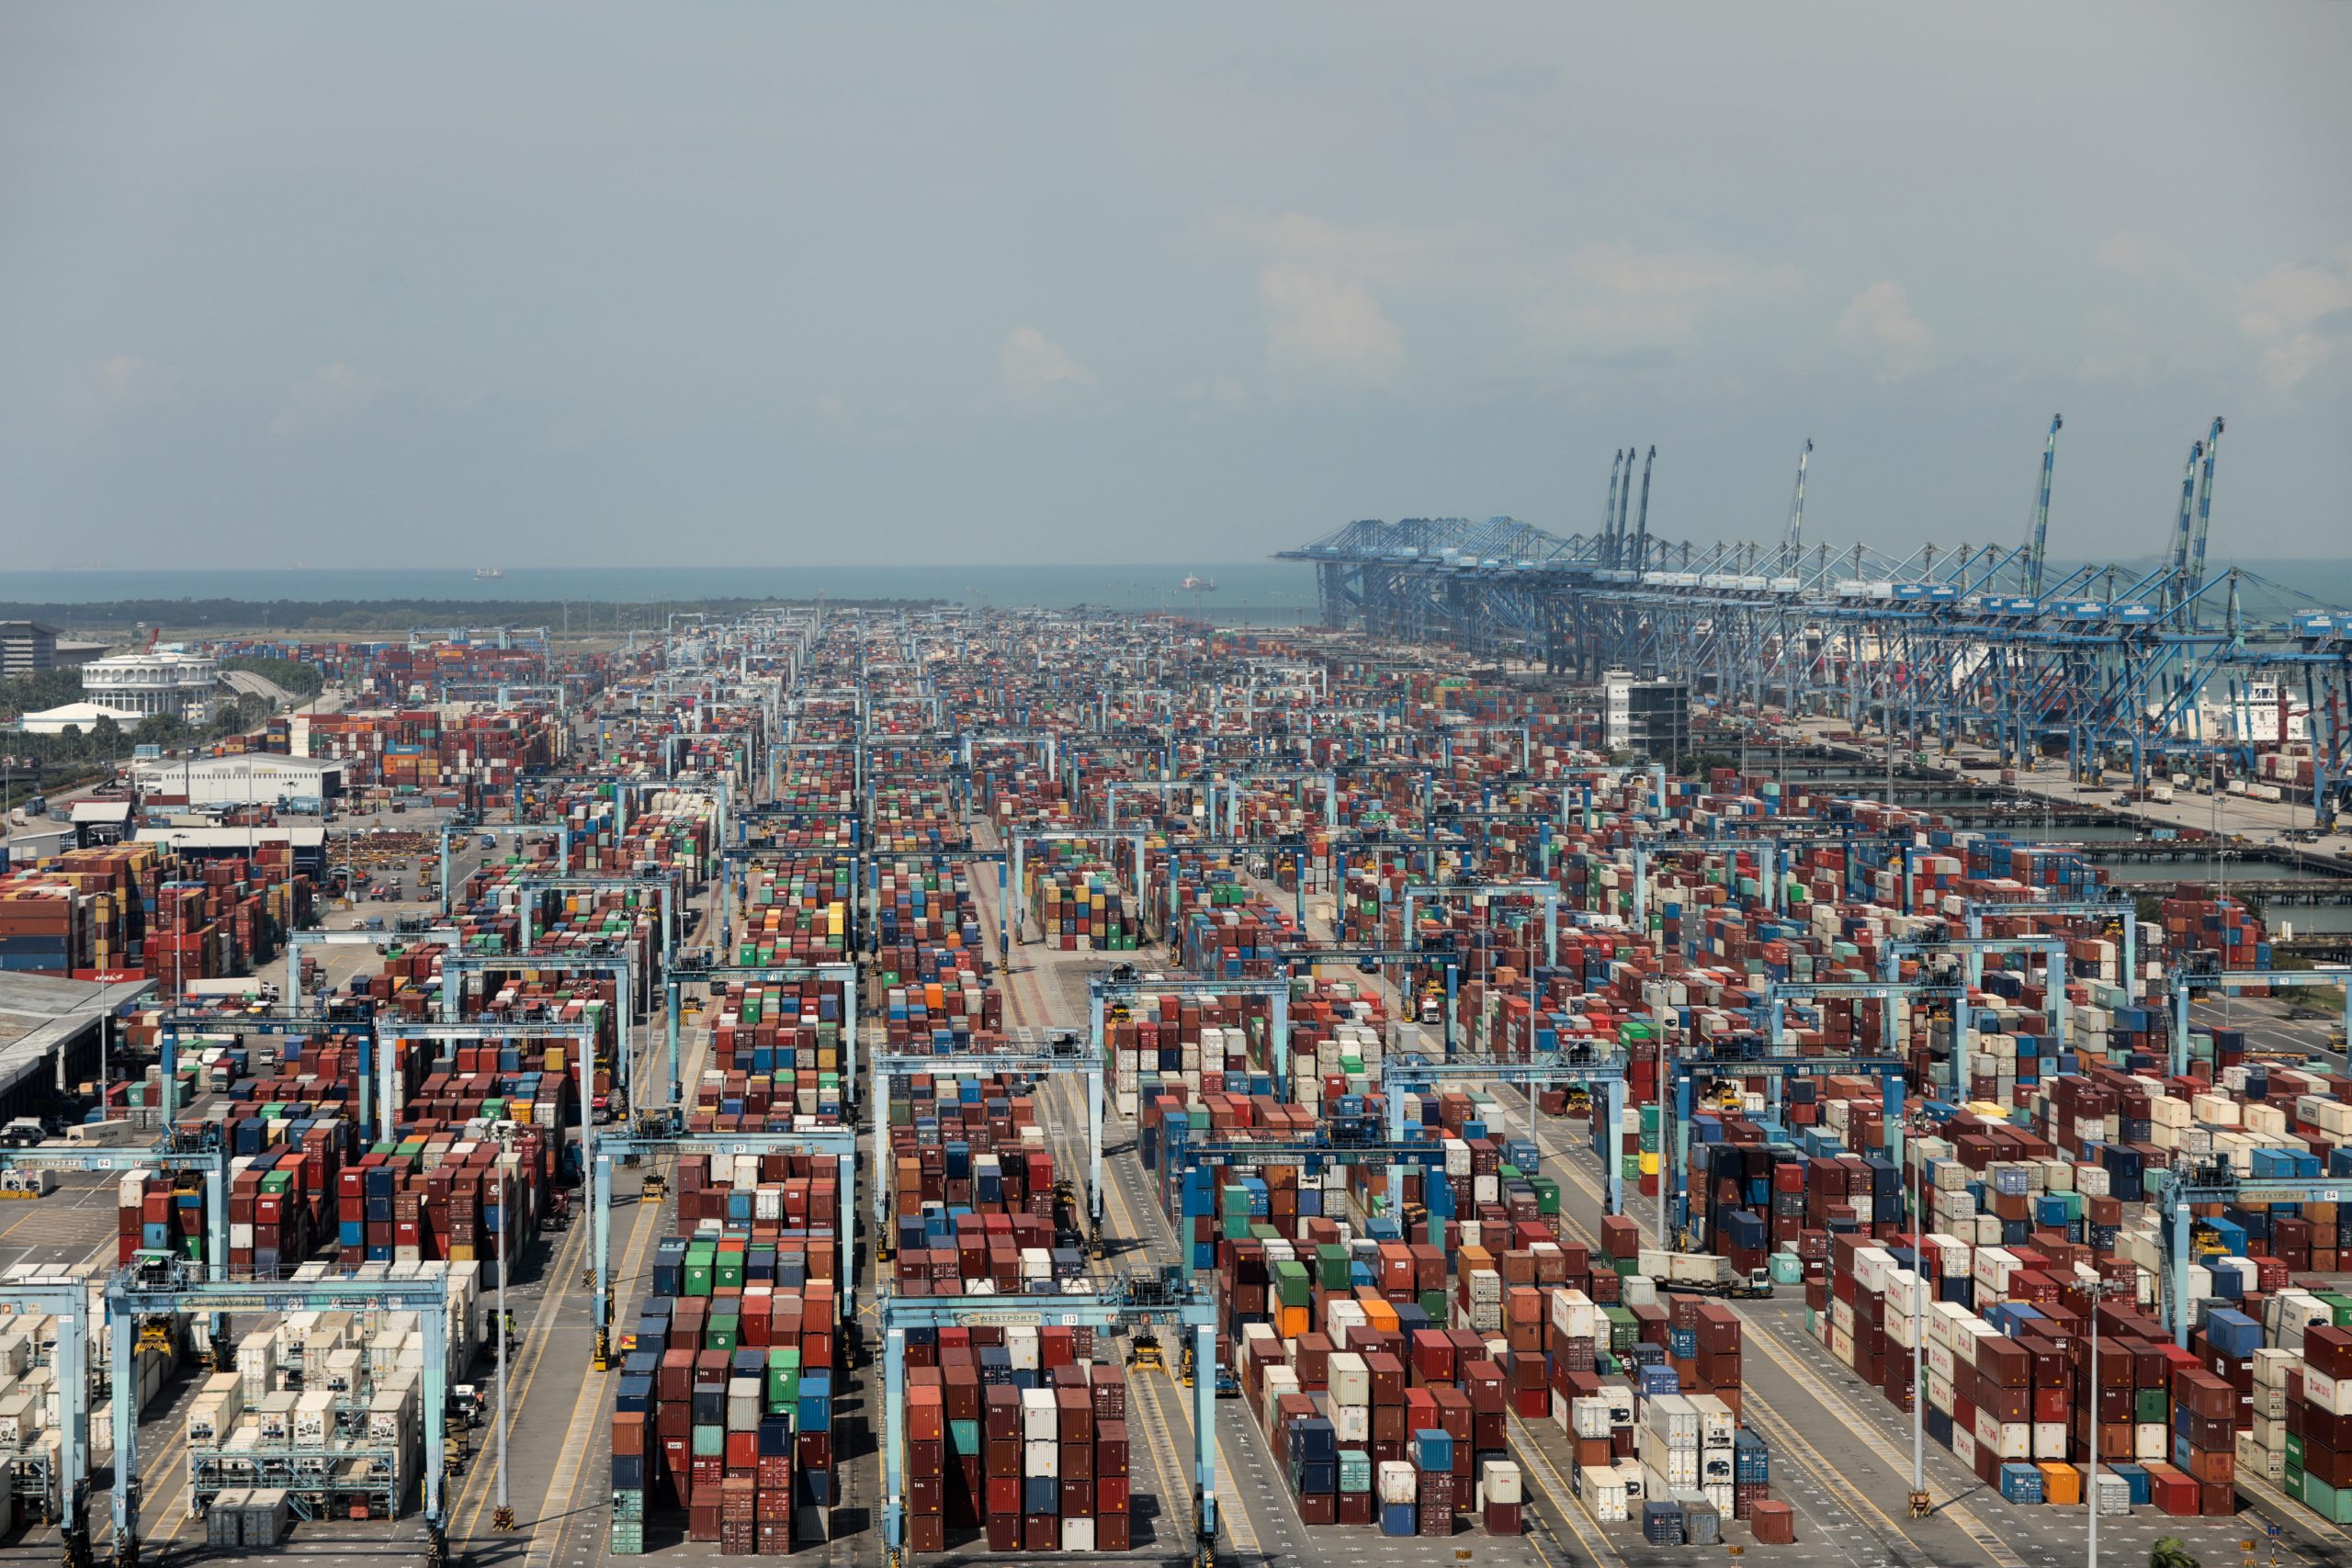 Malaysia’s top ports will increase capacity to support trade growth